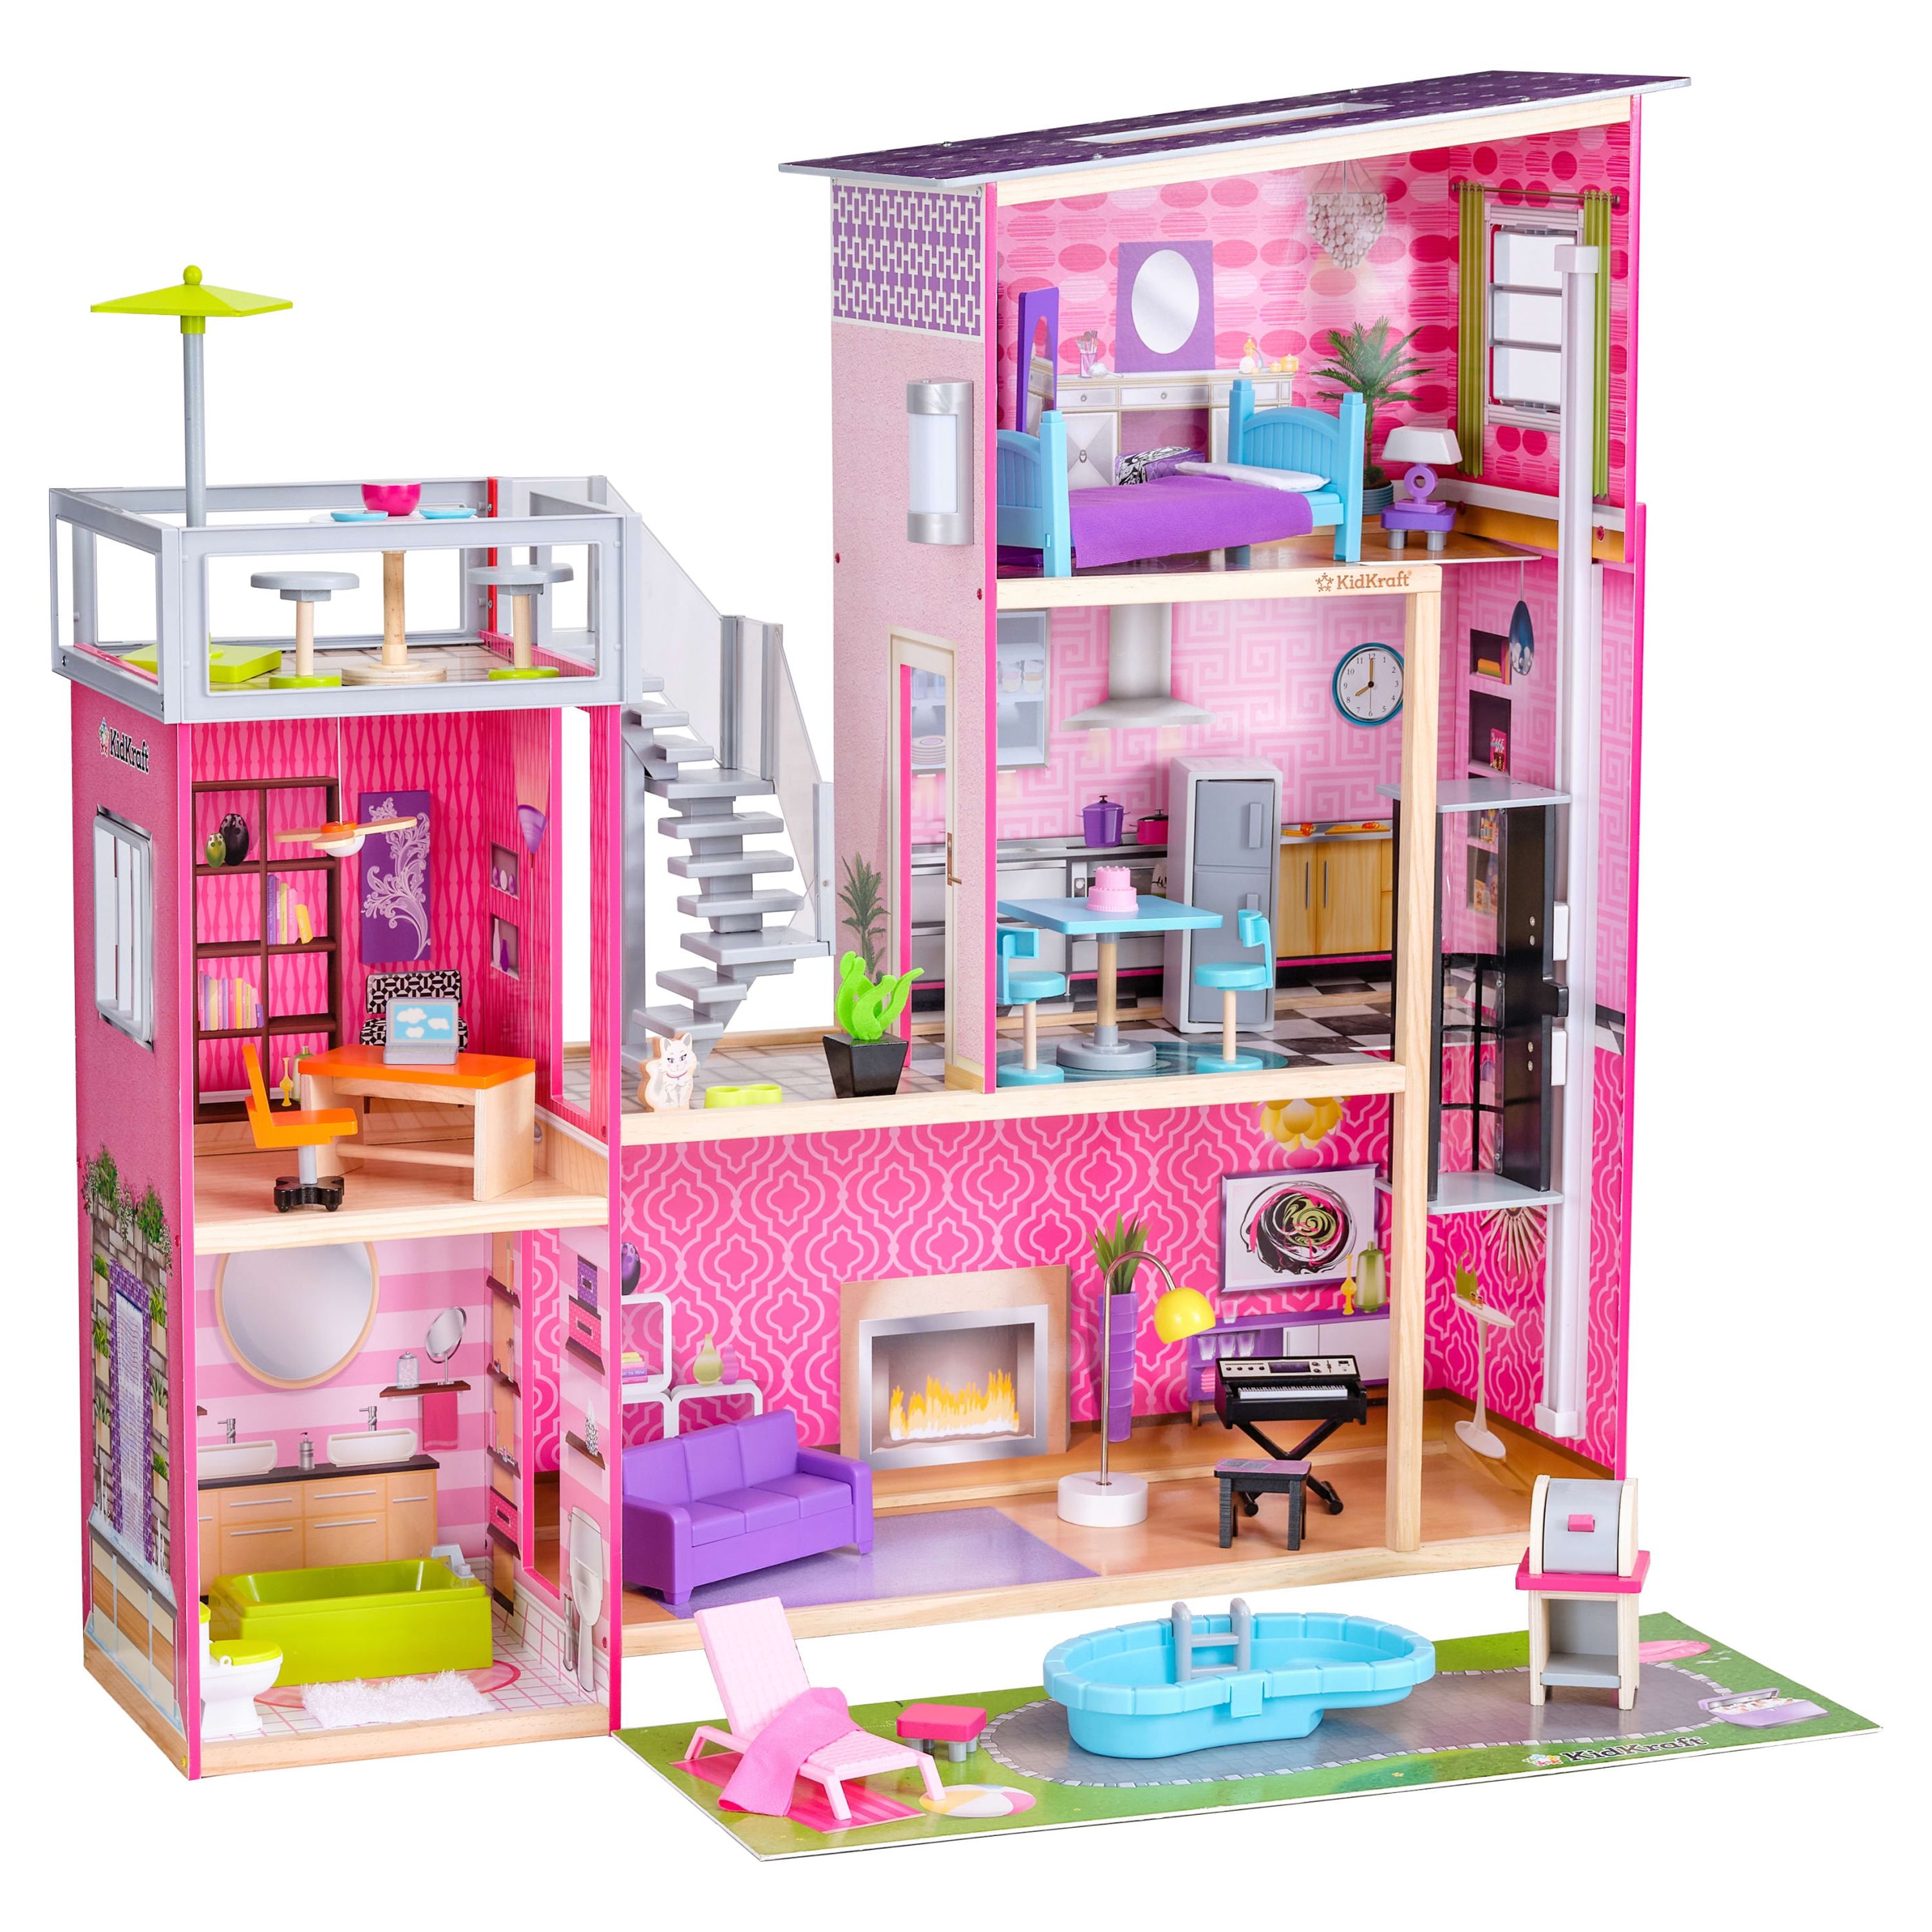 KidKraft Uptown Wooden Dollhouse with 36 Accessories, Ages 4 & up - image 1 of 11